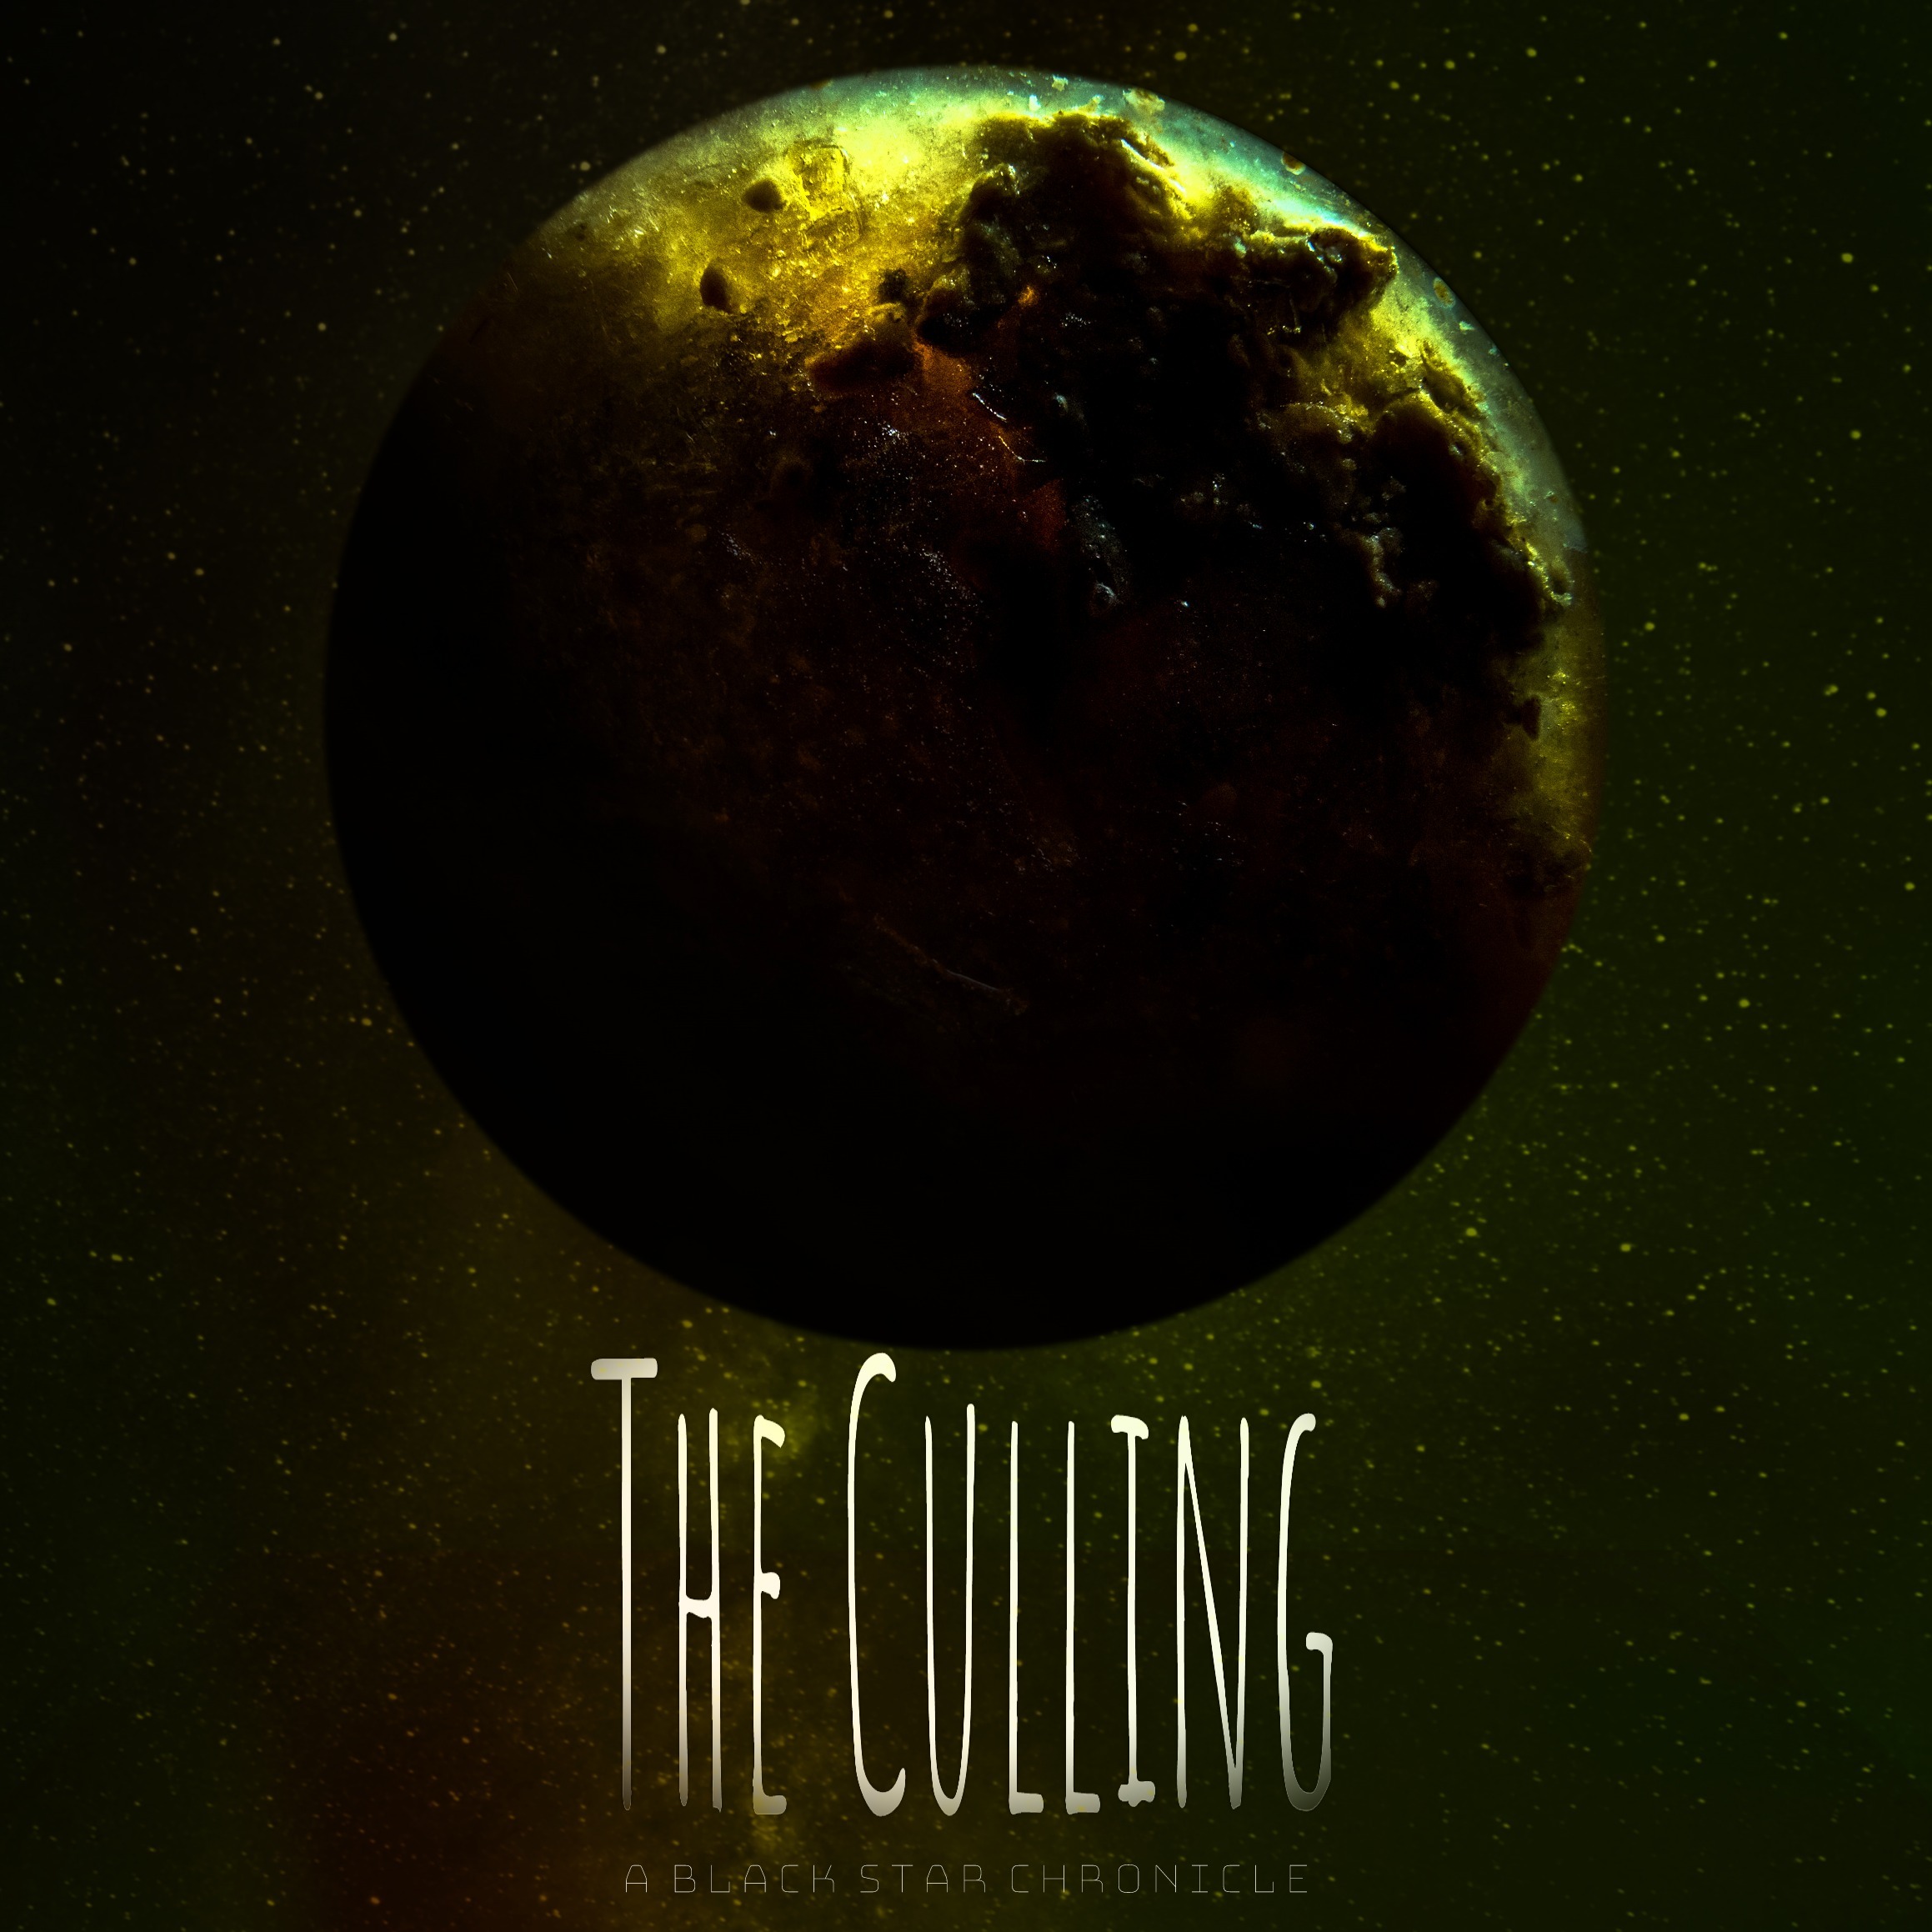 "The Culling" Podcast